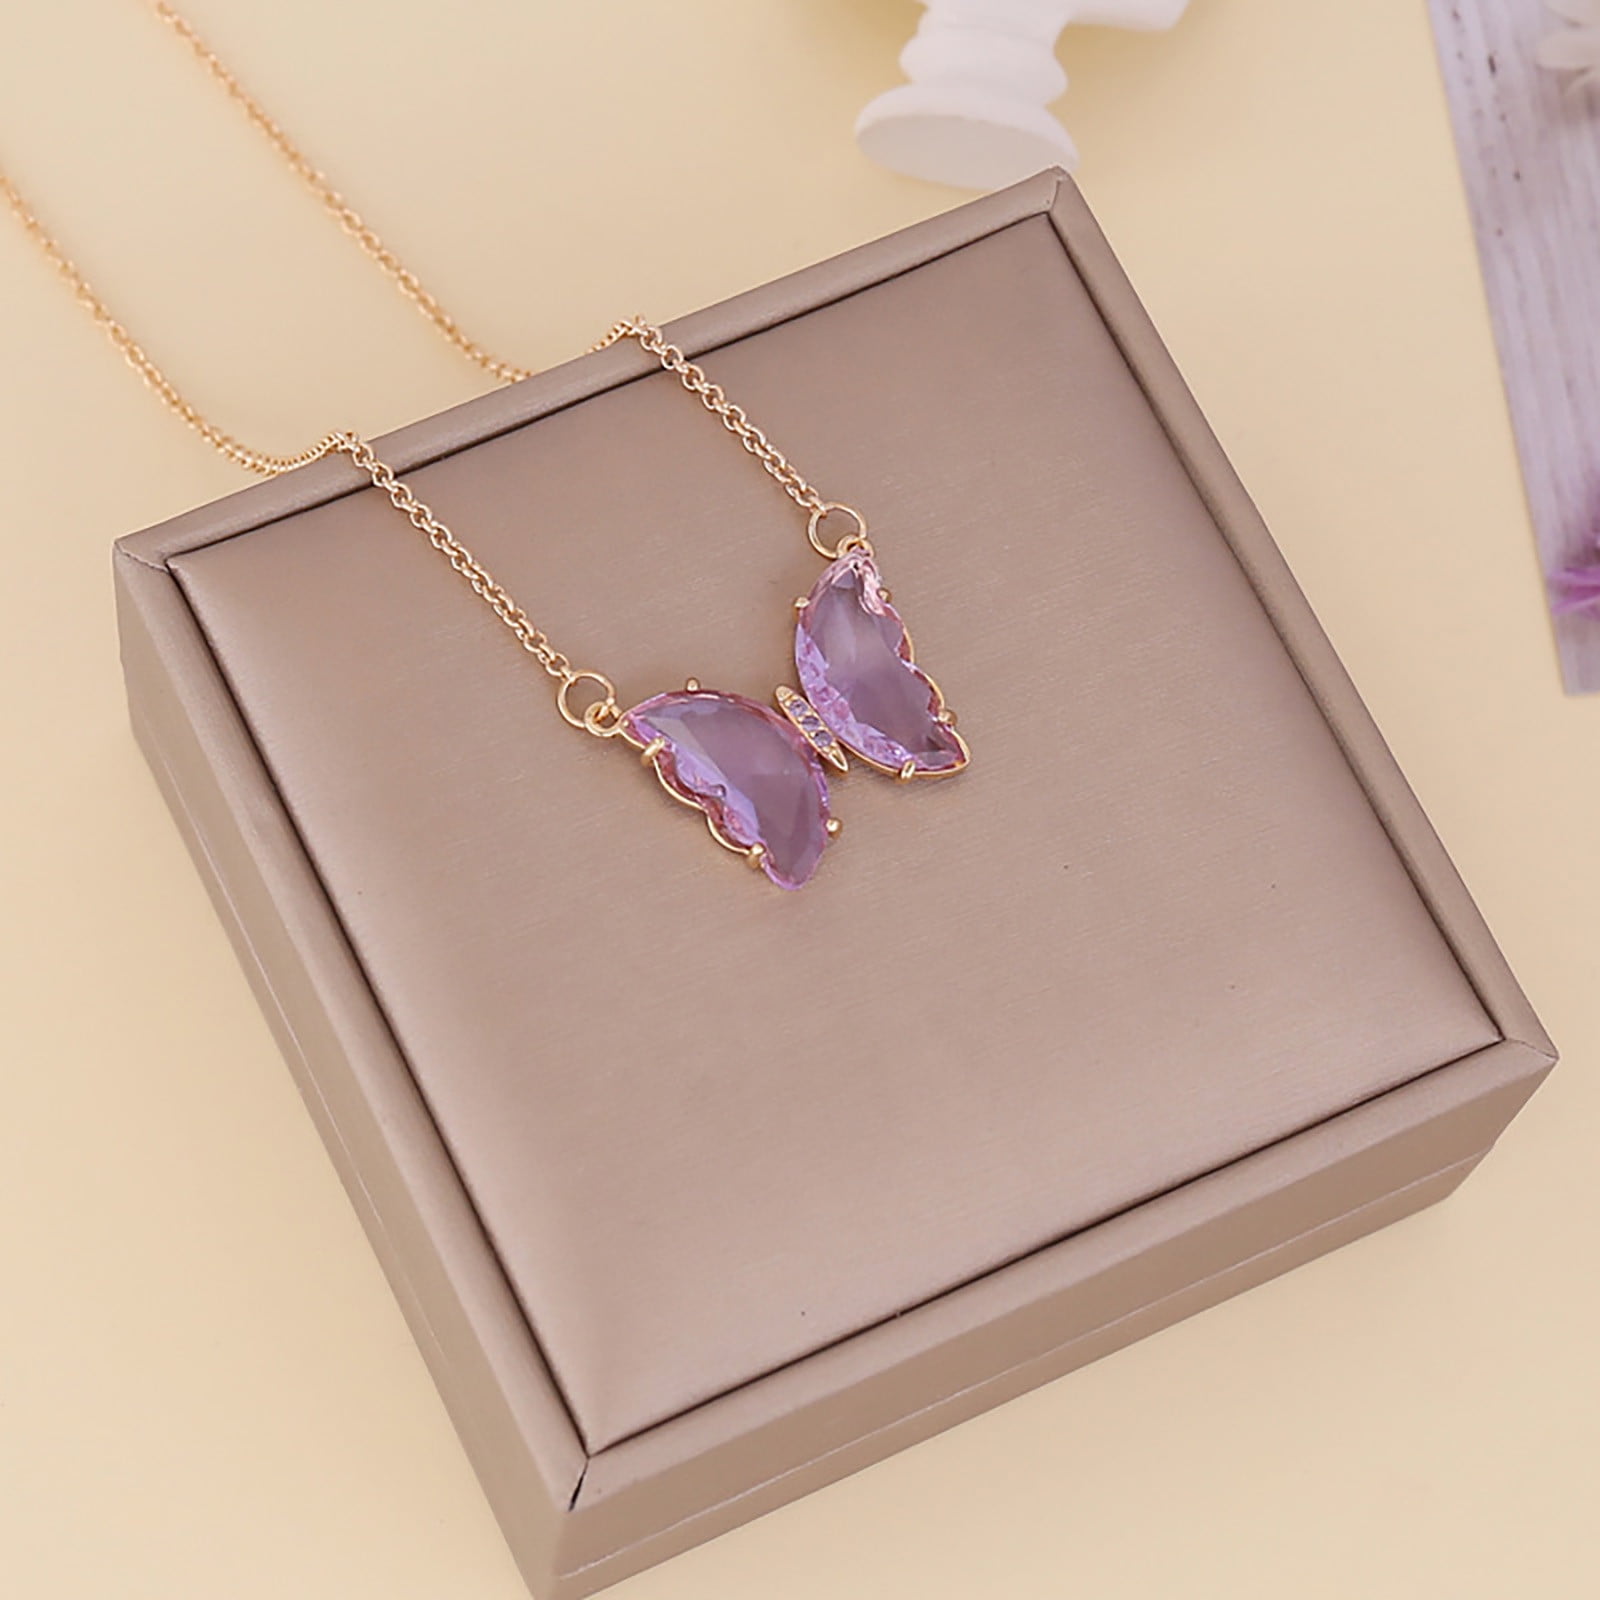 2 Inch Extension Purple Lilac Opal Butterfly Necklace Gift for Women Girl Teens Delicate Synthetic Opal Jewelry Gold Filled Box Chain 16